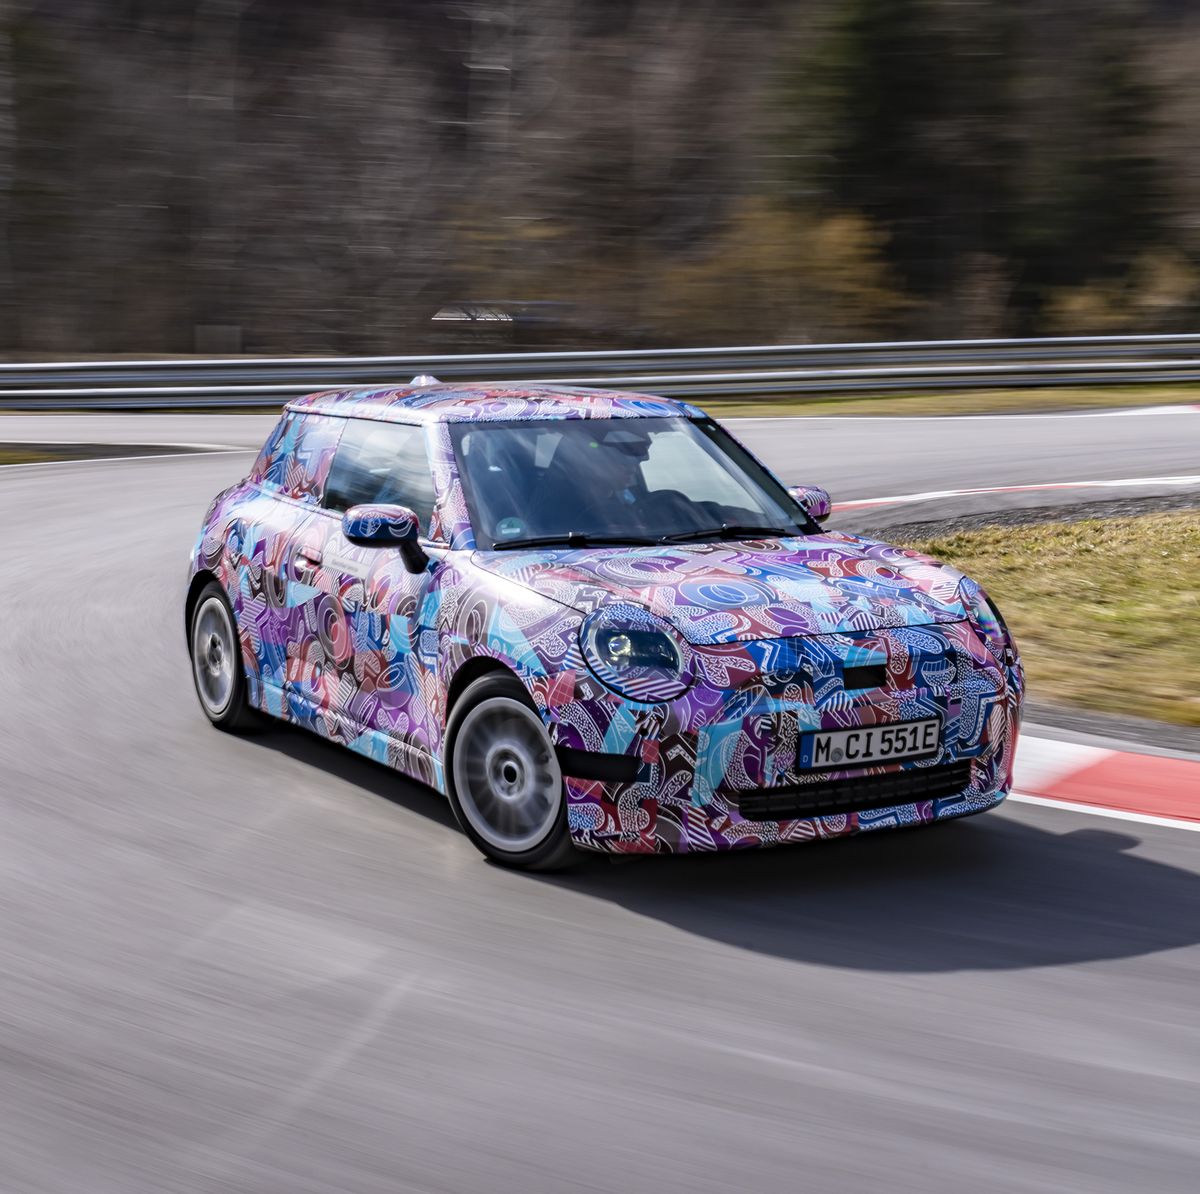 New Mini EV Promises More than Double the Range of the Current Car